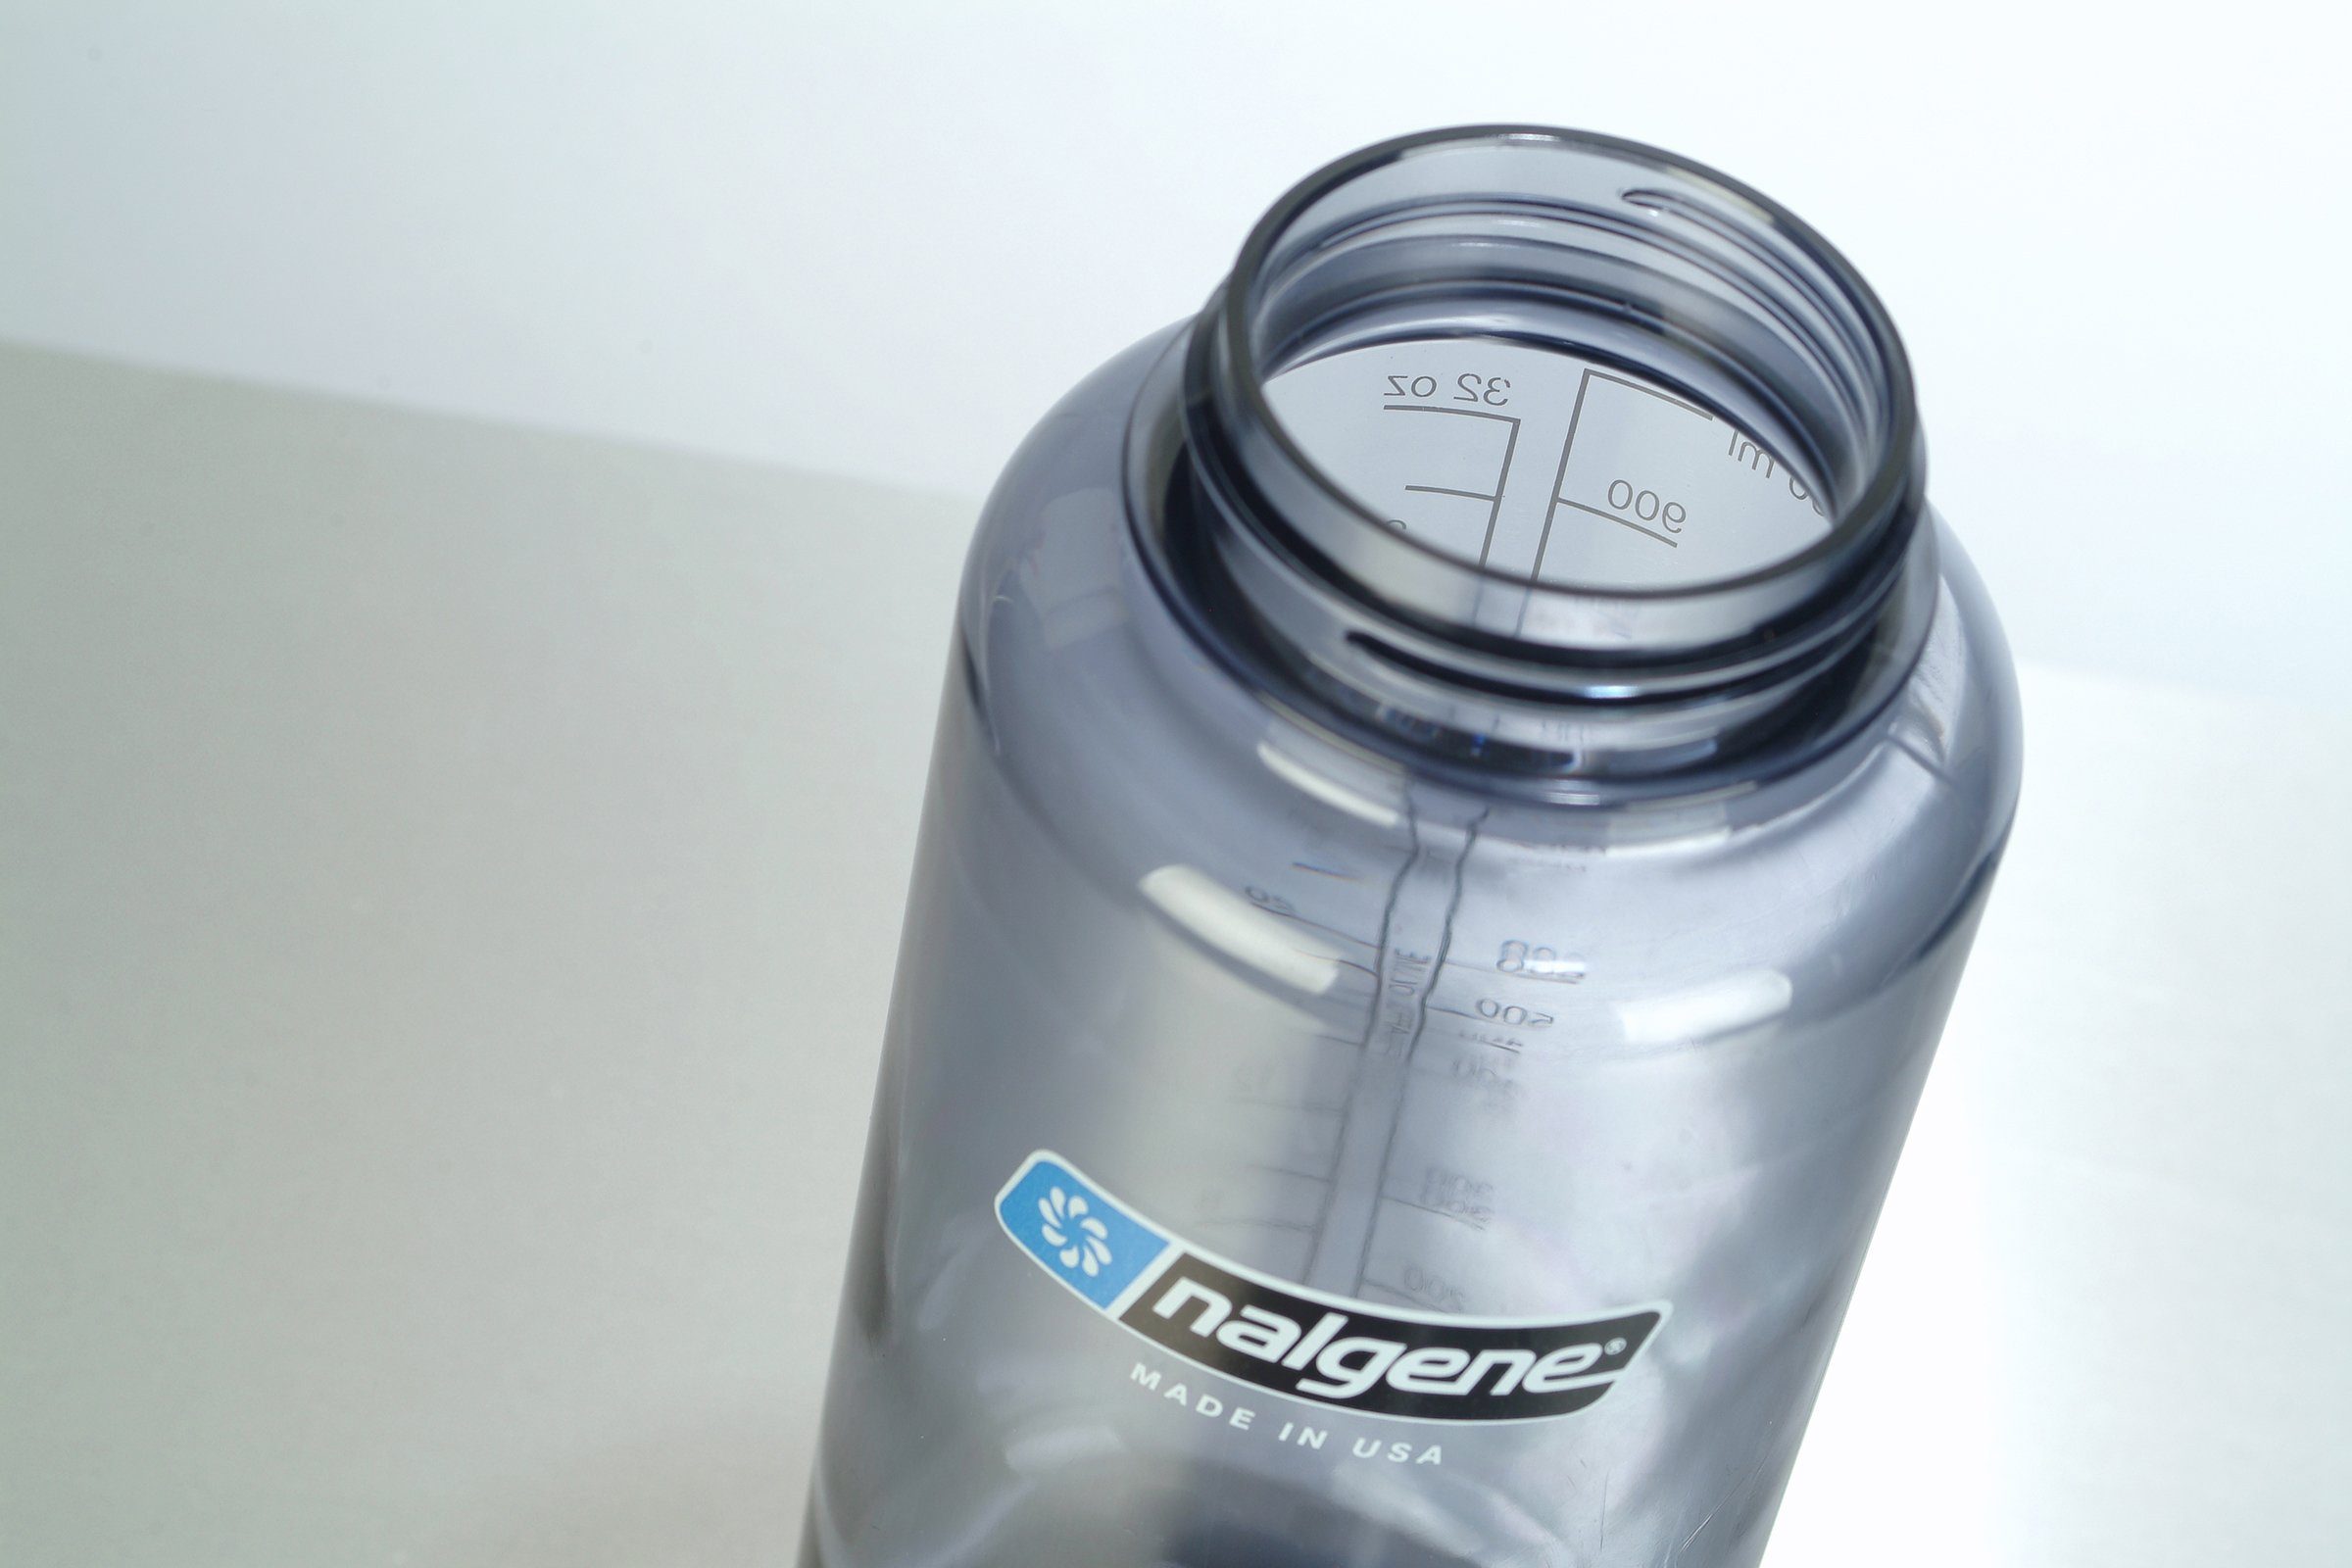 Nalgene Trinkflasche Nalgene Trinkflasche Liter chinese WH' grau Everyday 1 Logo 'Weithals